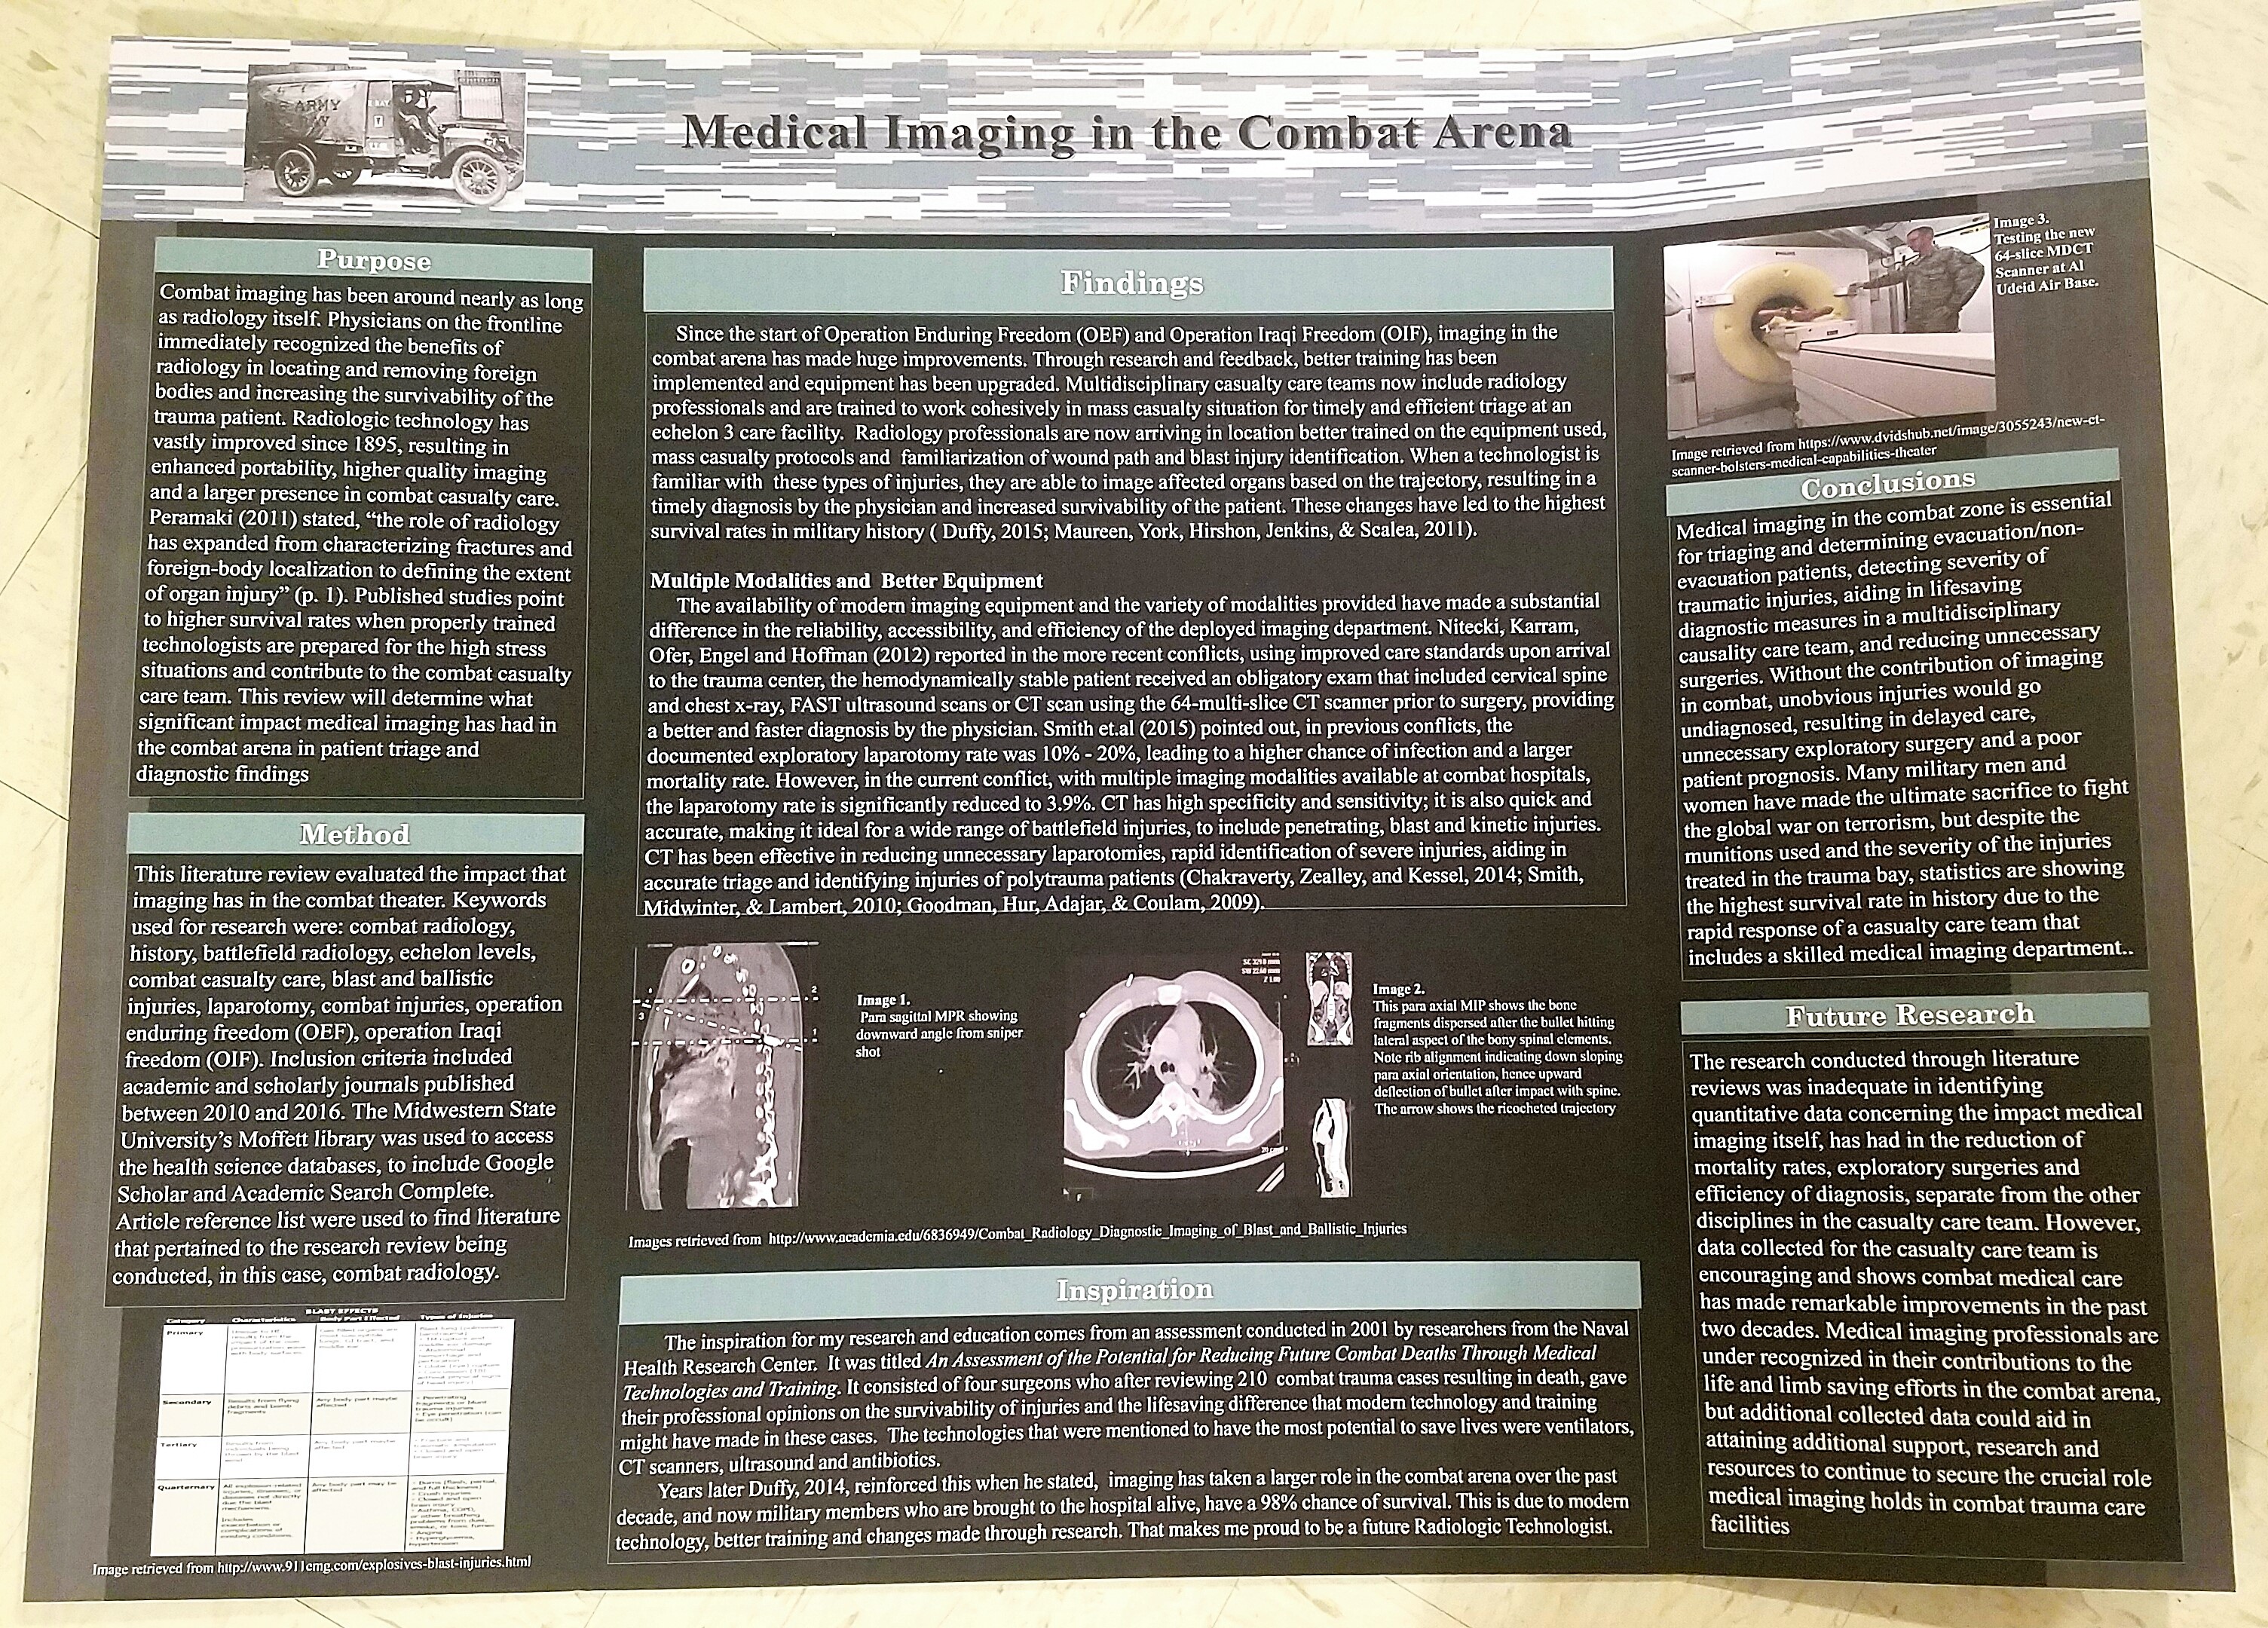 Image of research poster